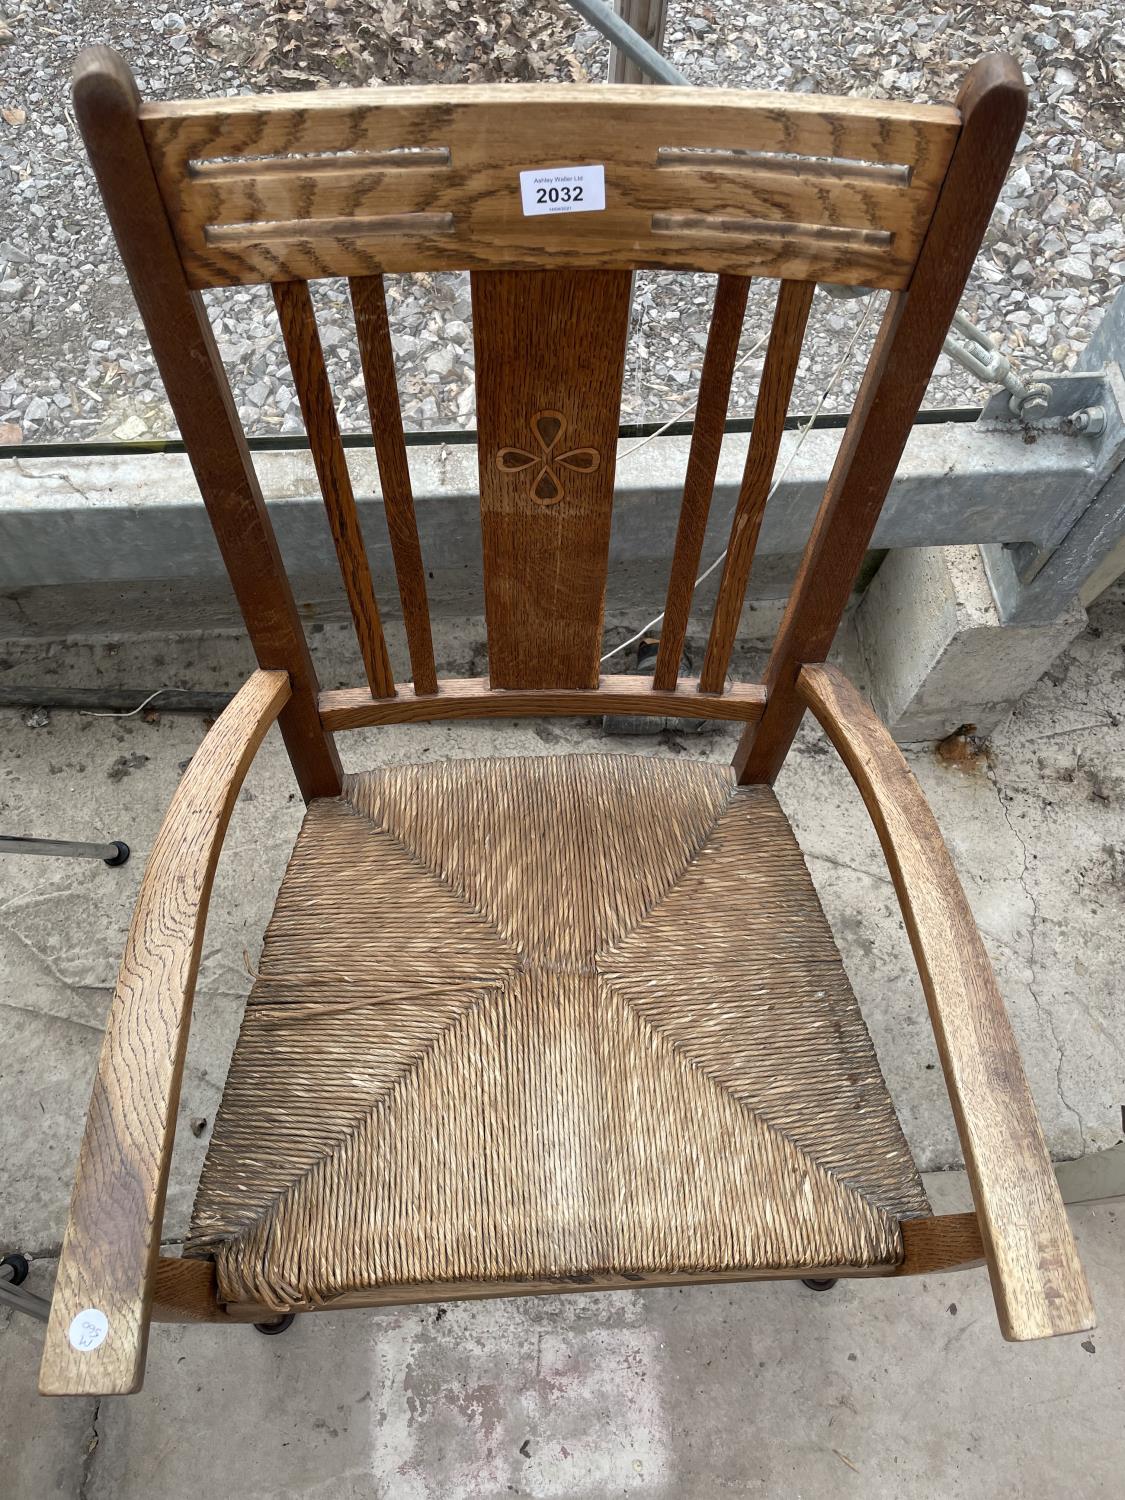 AN ART NOUVEAU OAK FRAMED LOW ARM CHAIR WITH AN INLAID CLOVER LEAF AND A RUSH SEAT - Image 2 of 5